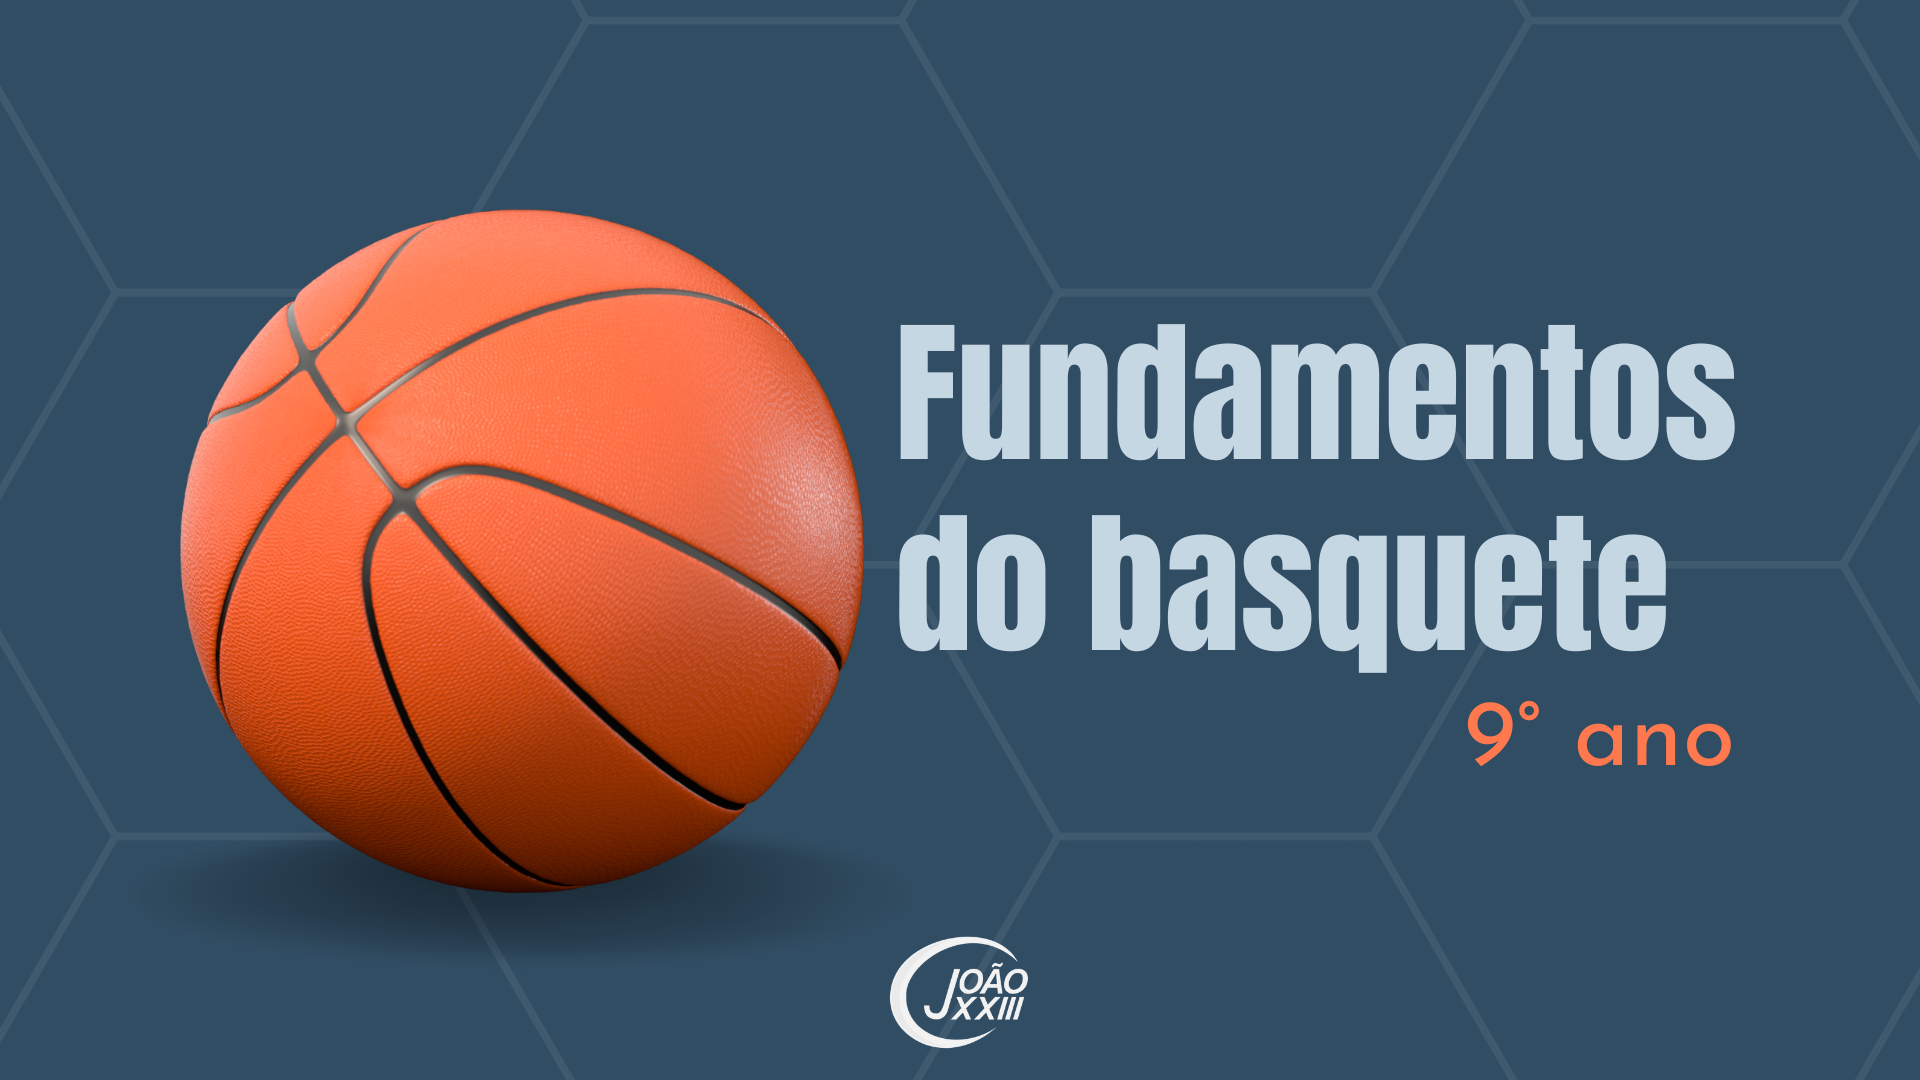 You are currently viewing Fundamentos do basquete!